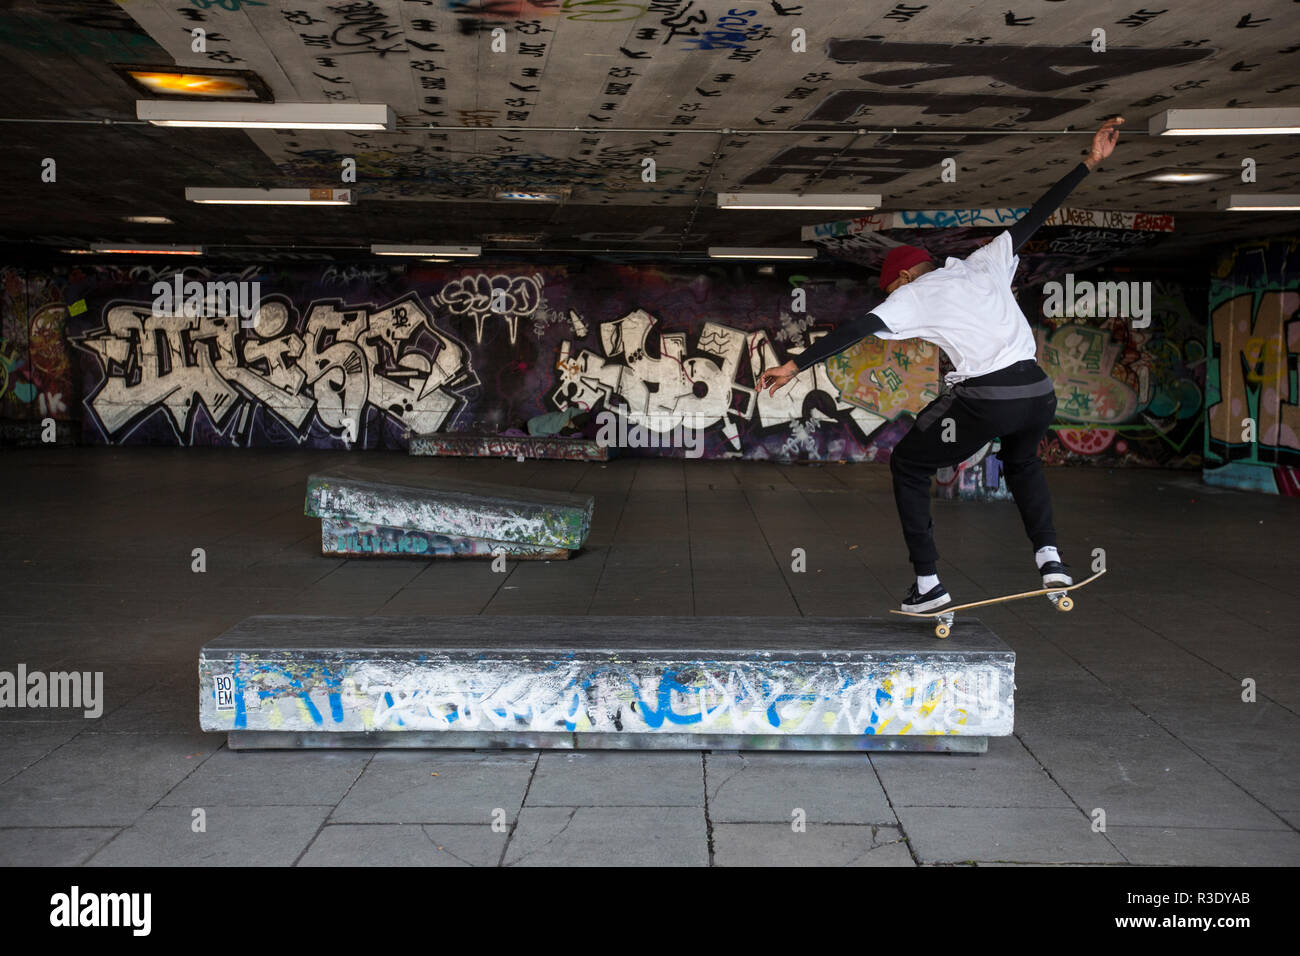 Skateboarders under the Queen Elizabeth Hall along the Southbank area of central London, England, United Kingdom Stock Photo